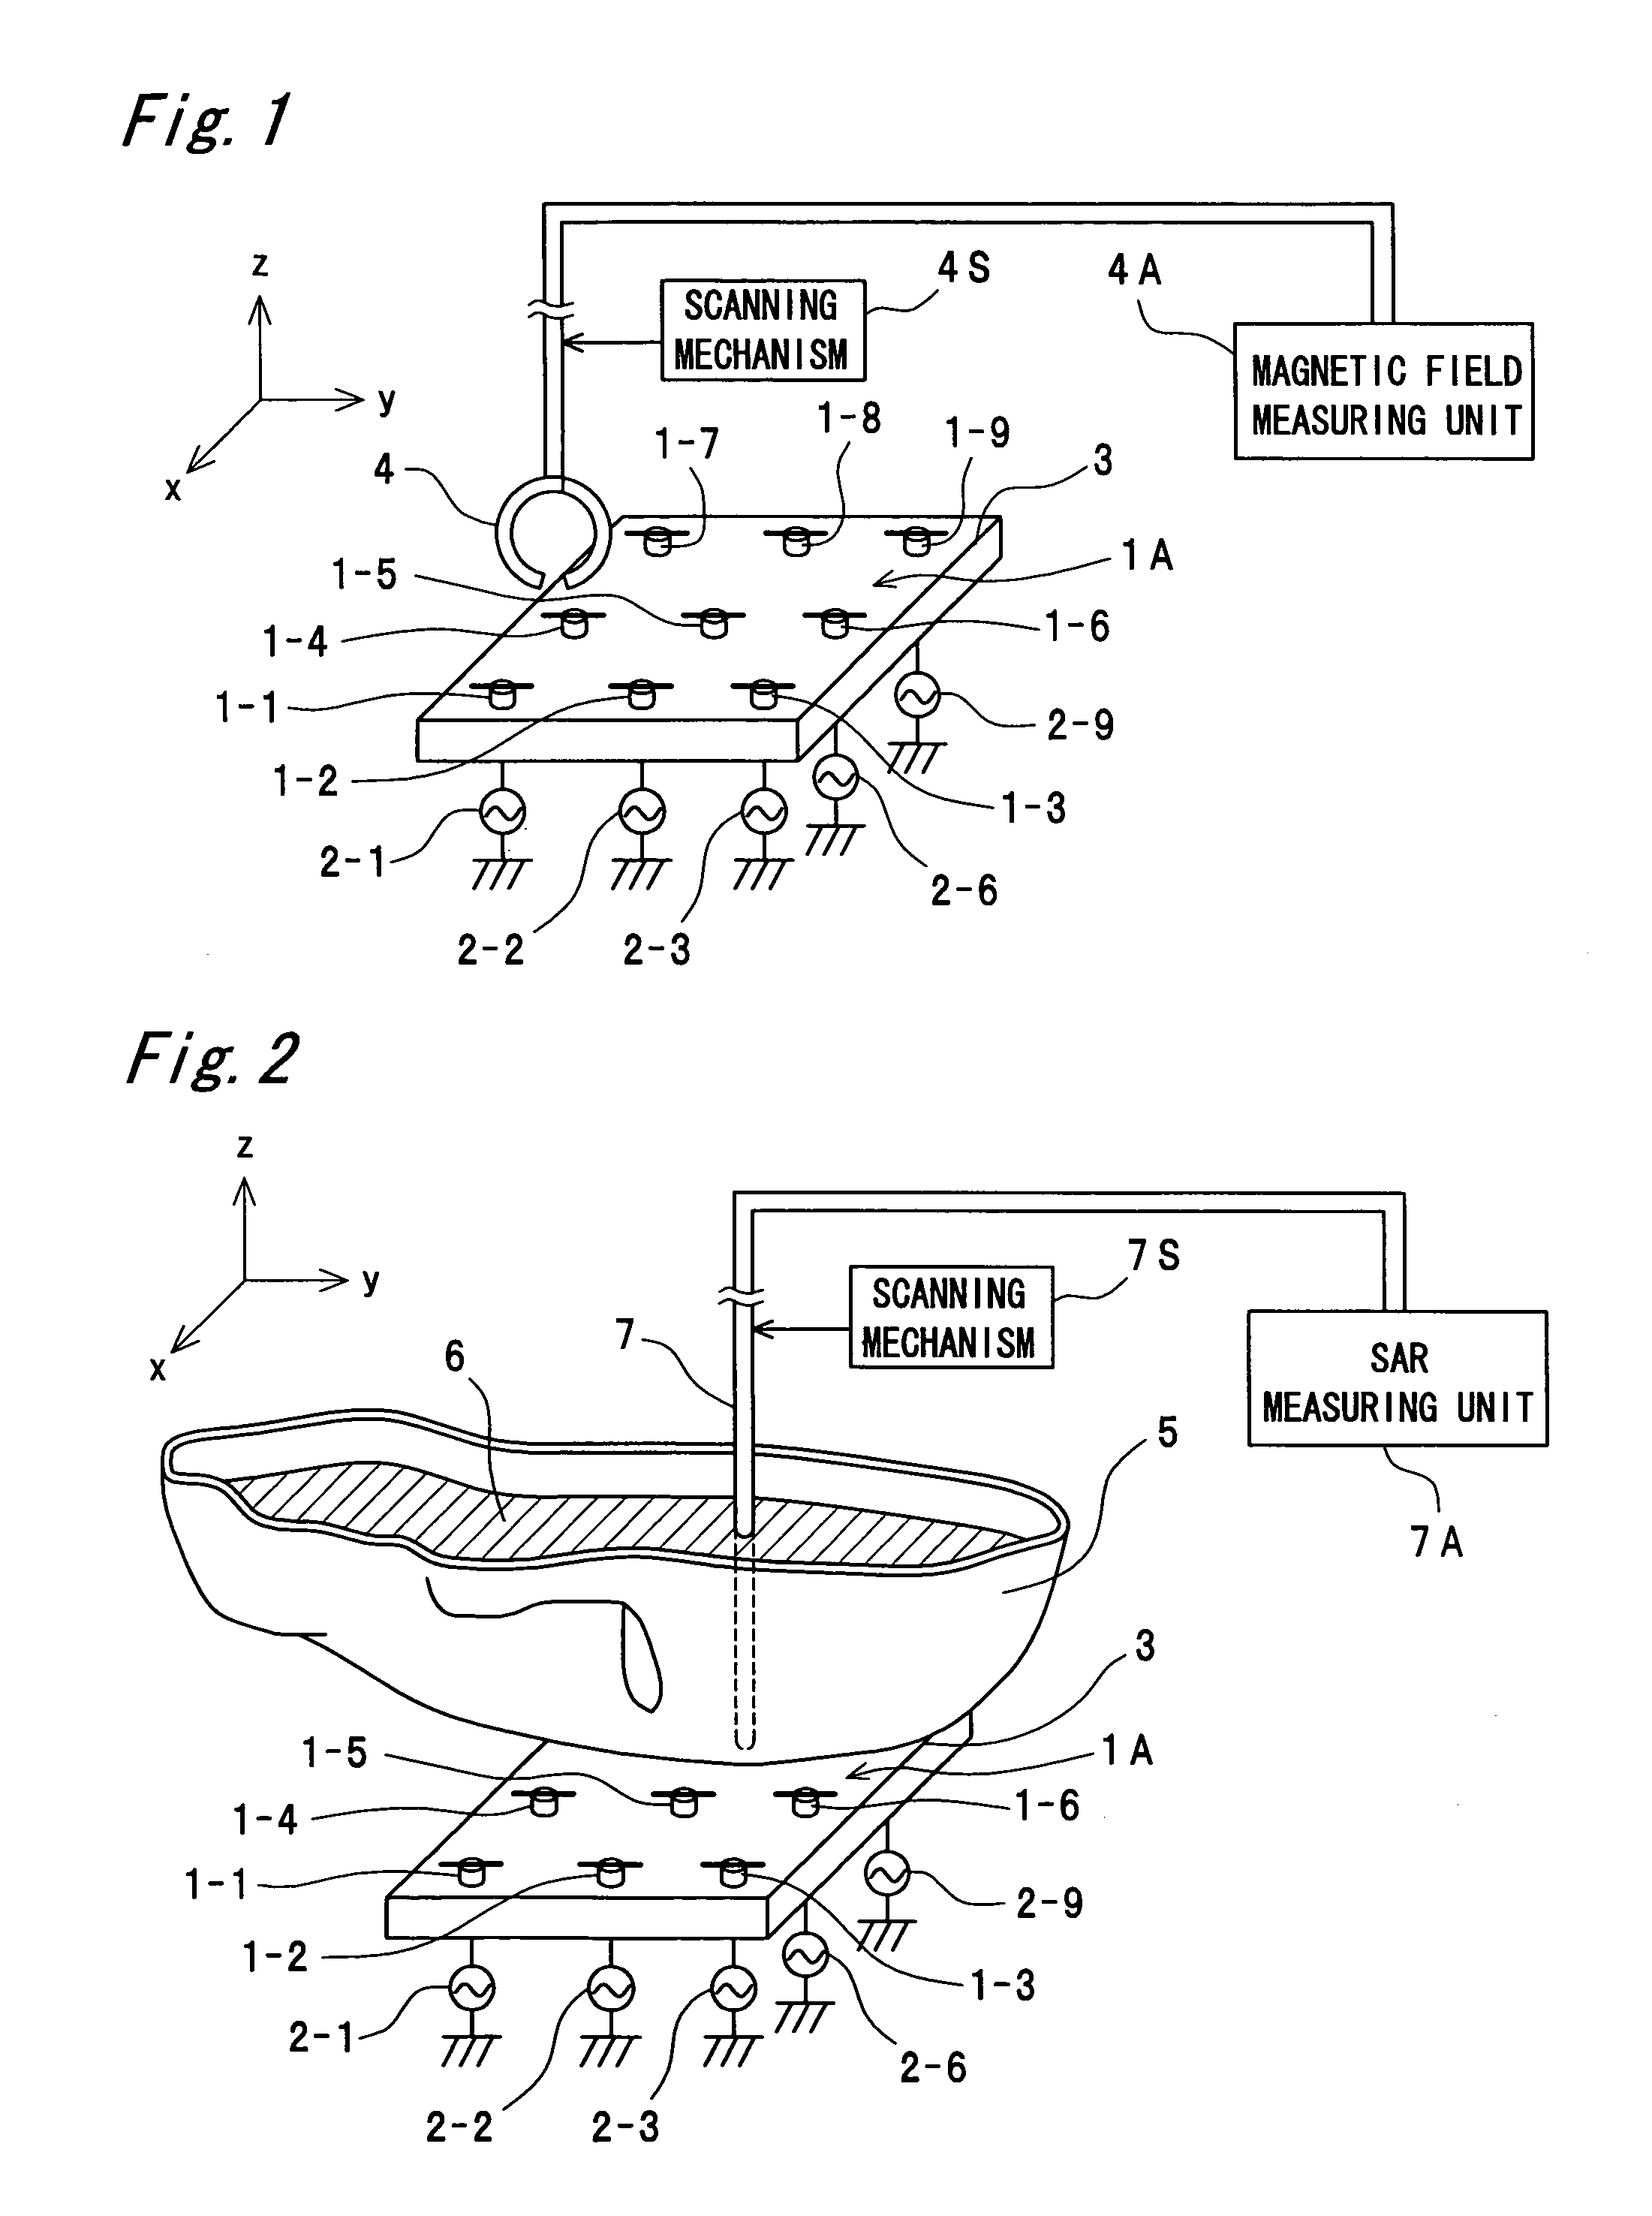 Apparatus for measuring specific absorption rate of radio communication apparatus